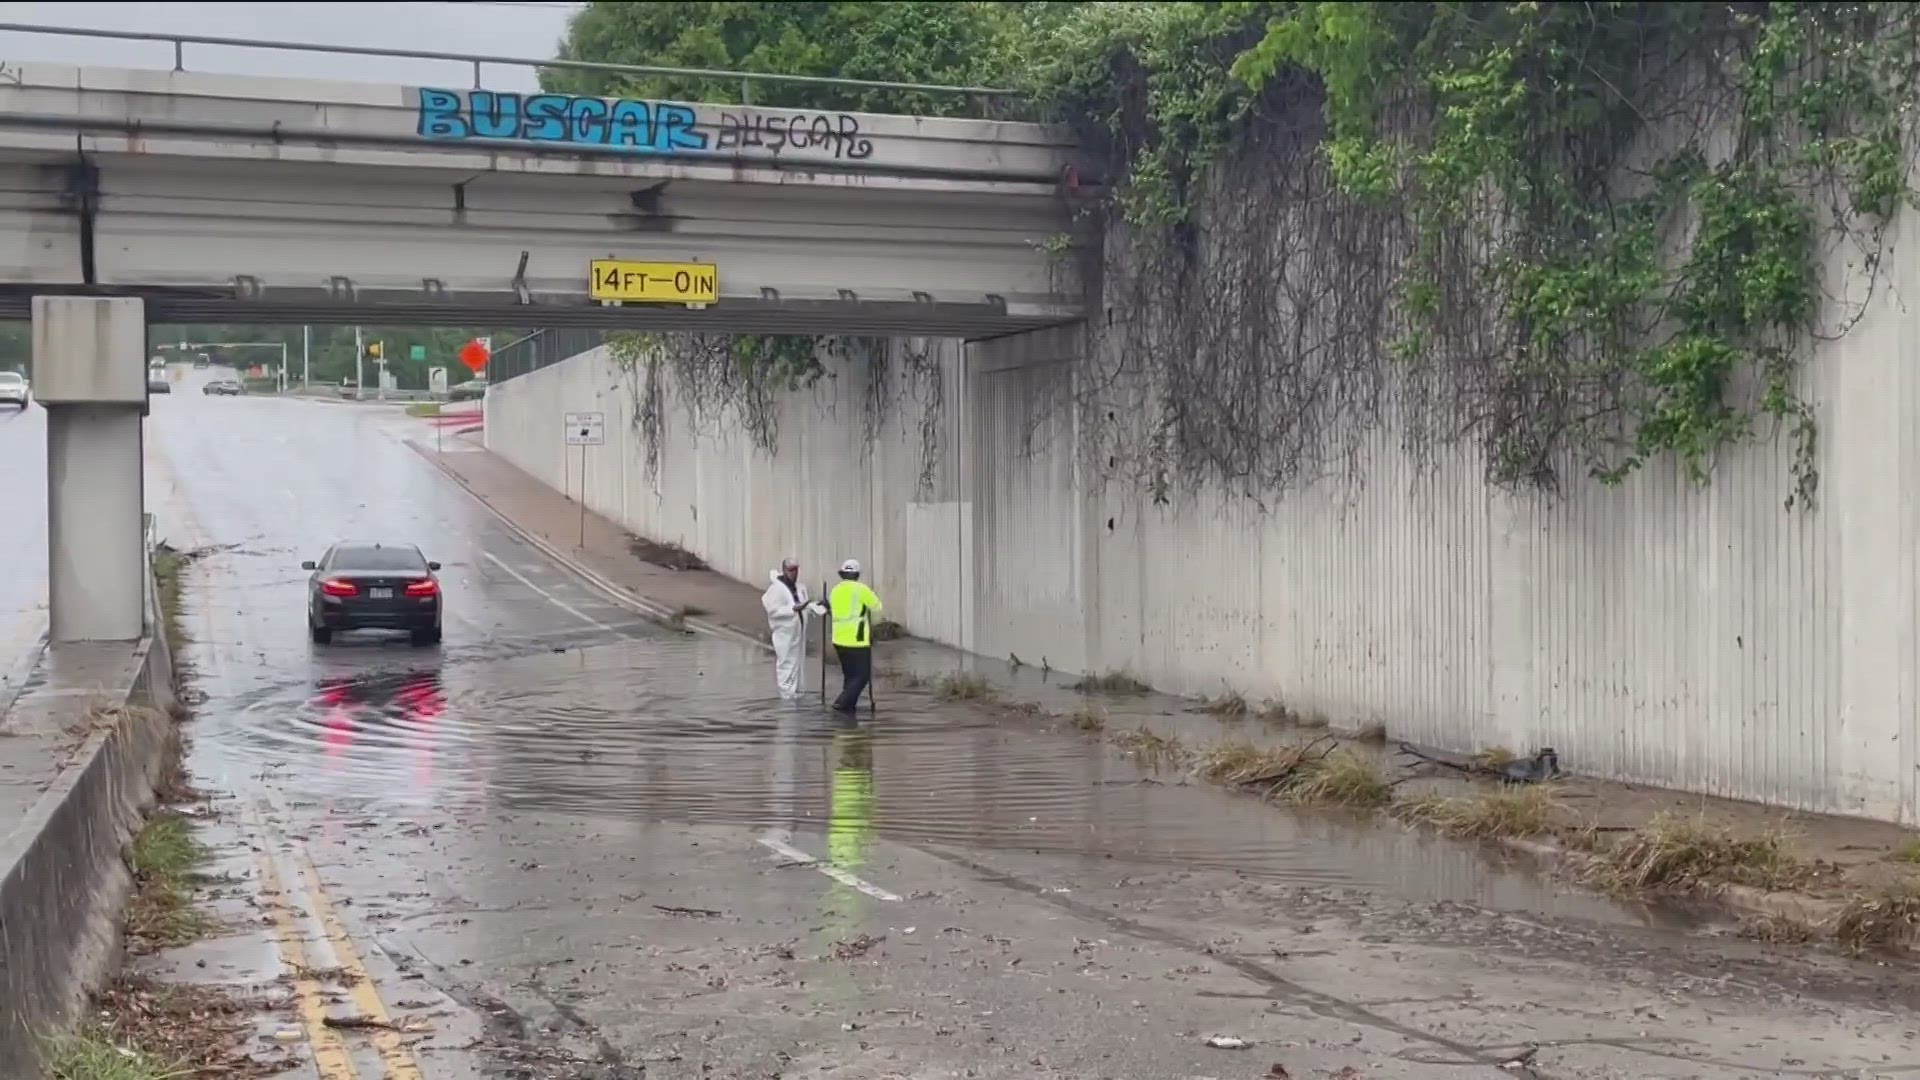 As heavy rain swept across Central Texas Thursday, first responders jumped into action.